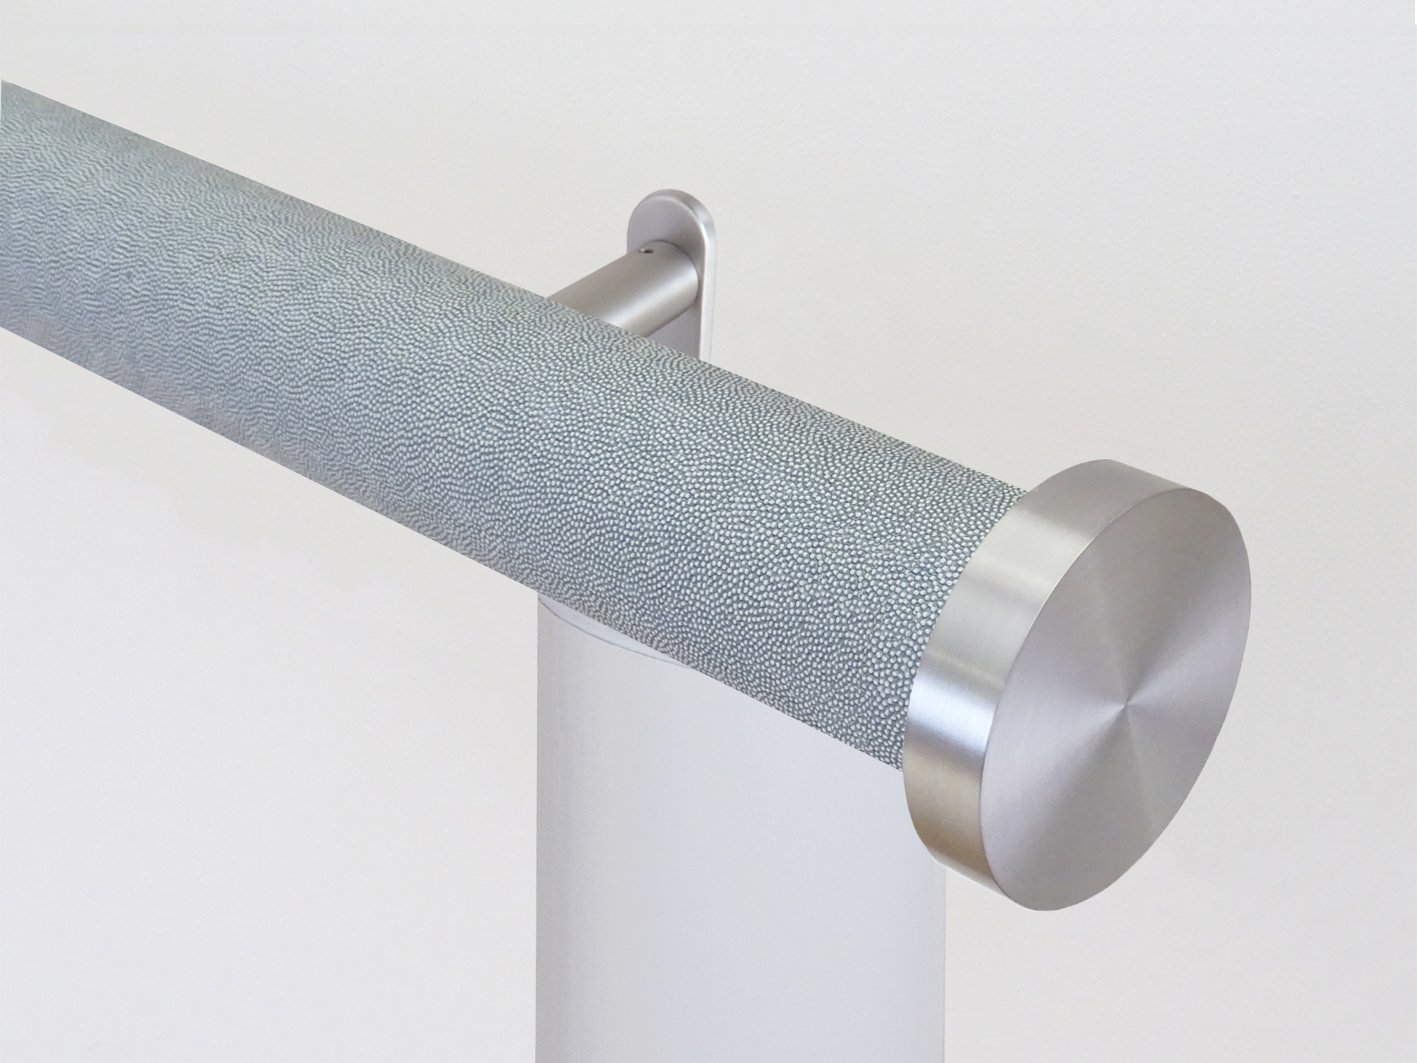 Motorised electric curtain pole in moonlight blue, wireless & battery powered using the Somfy Glydea track | Walcot House UK curtain pole specialists